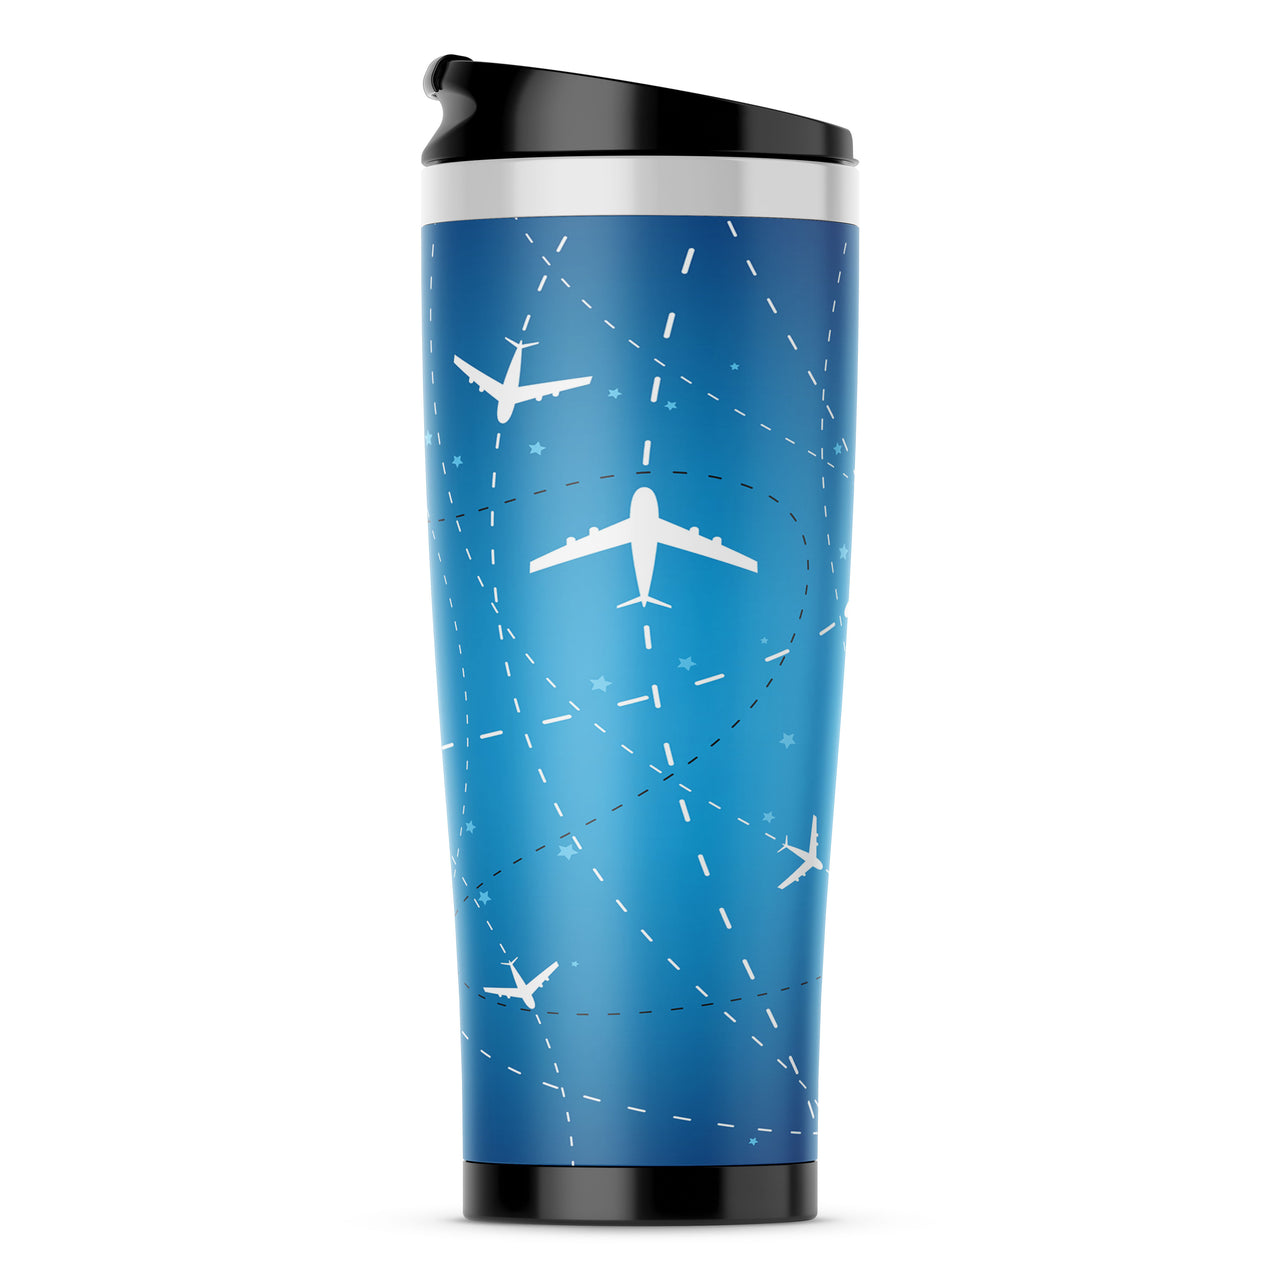 Travelling with Aircraft Designed Stainless Steel Travel Mugs